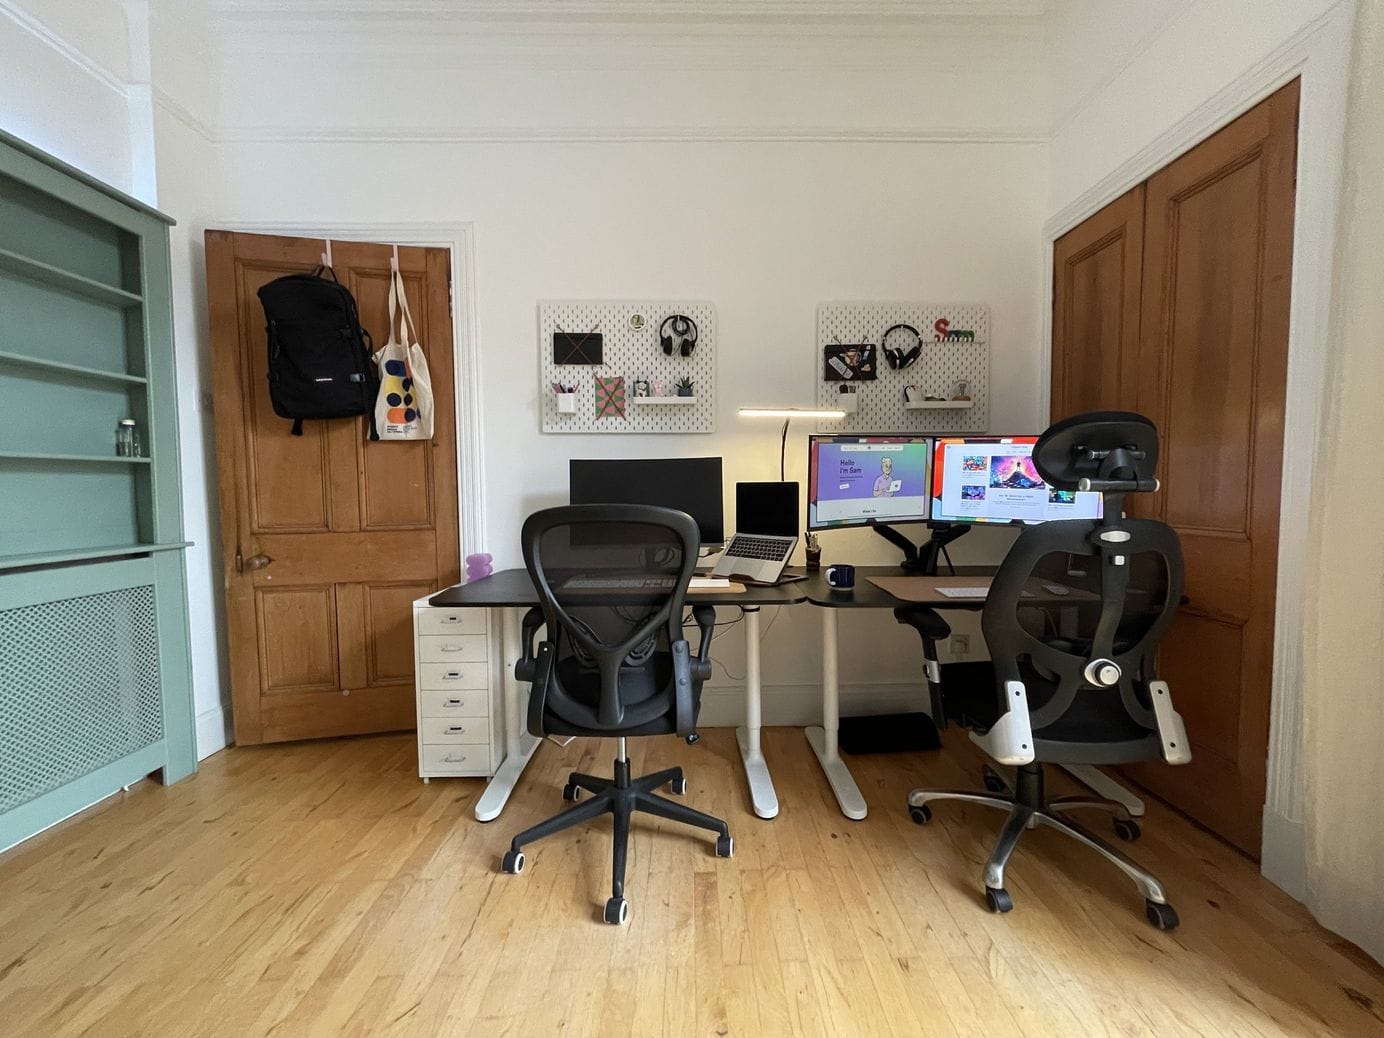 A shared home office featuring two standing desks with ergonomic chairs and computers, a backpack and a tote bag hanging on the door, and pegboards with various items on the wall